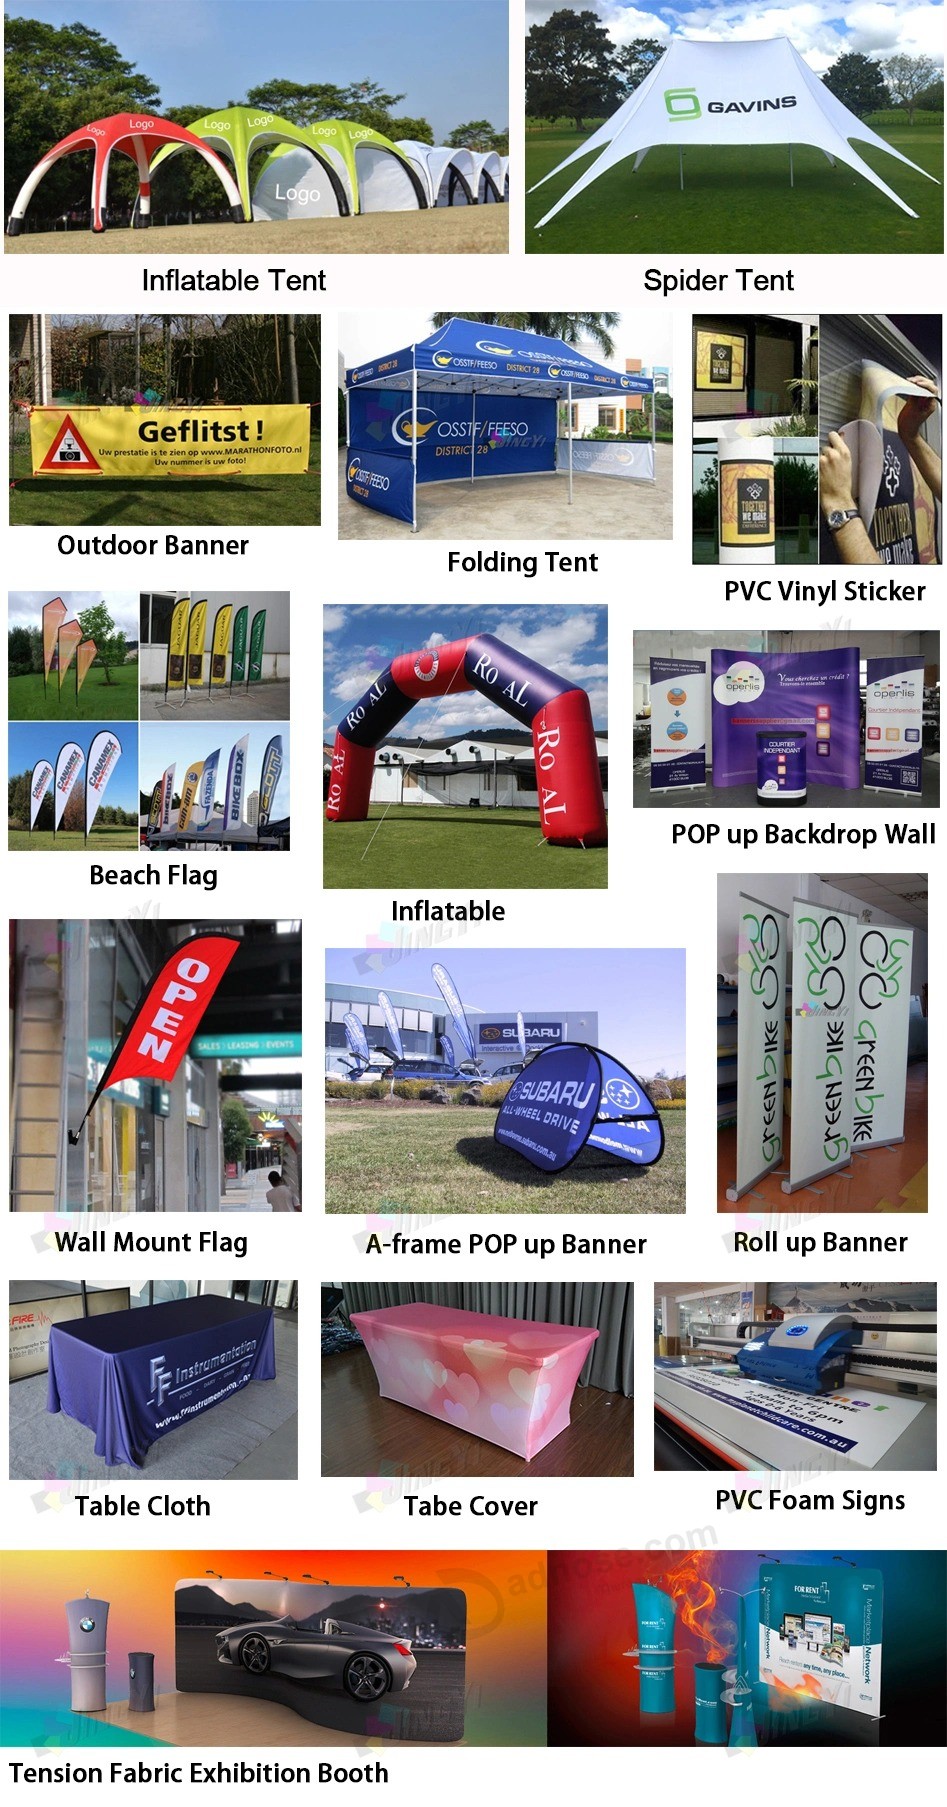 Custom Print Outdoor Advertising Display leaf/Bow/Teardrop/Vetical/Feather/Swooper/Beach Sports Event Pole Flying Flag